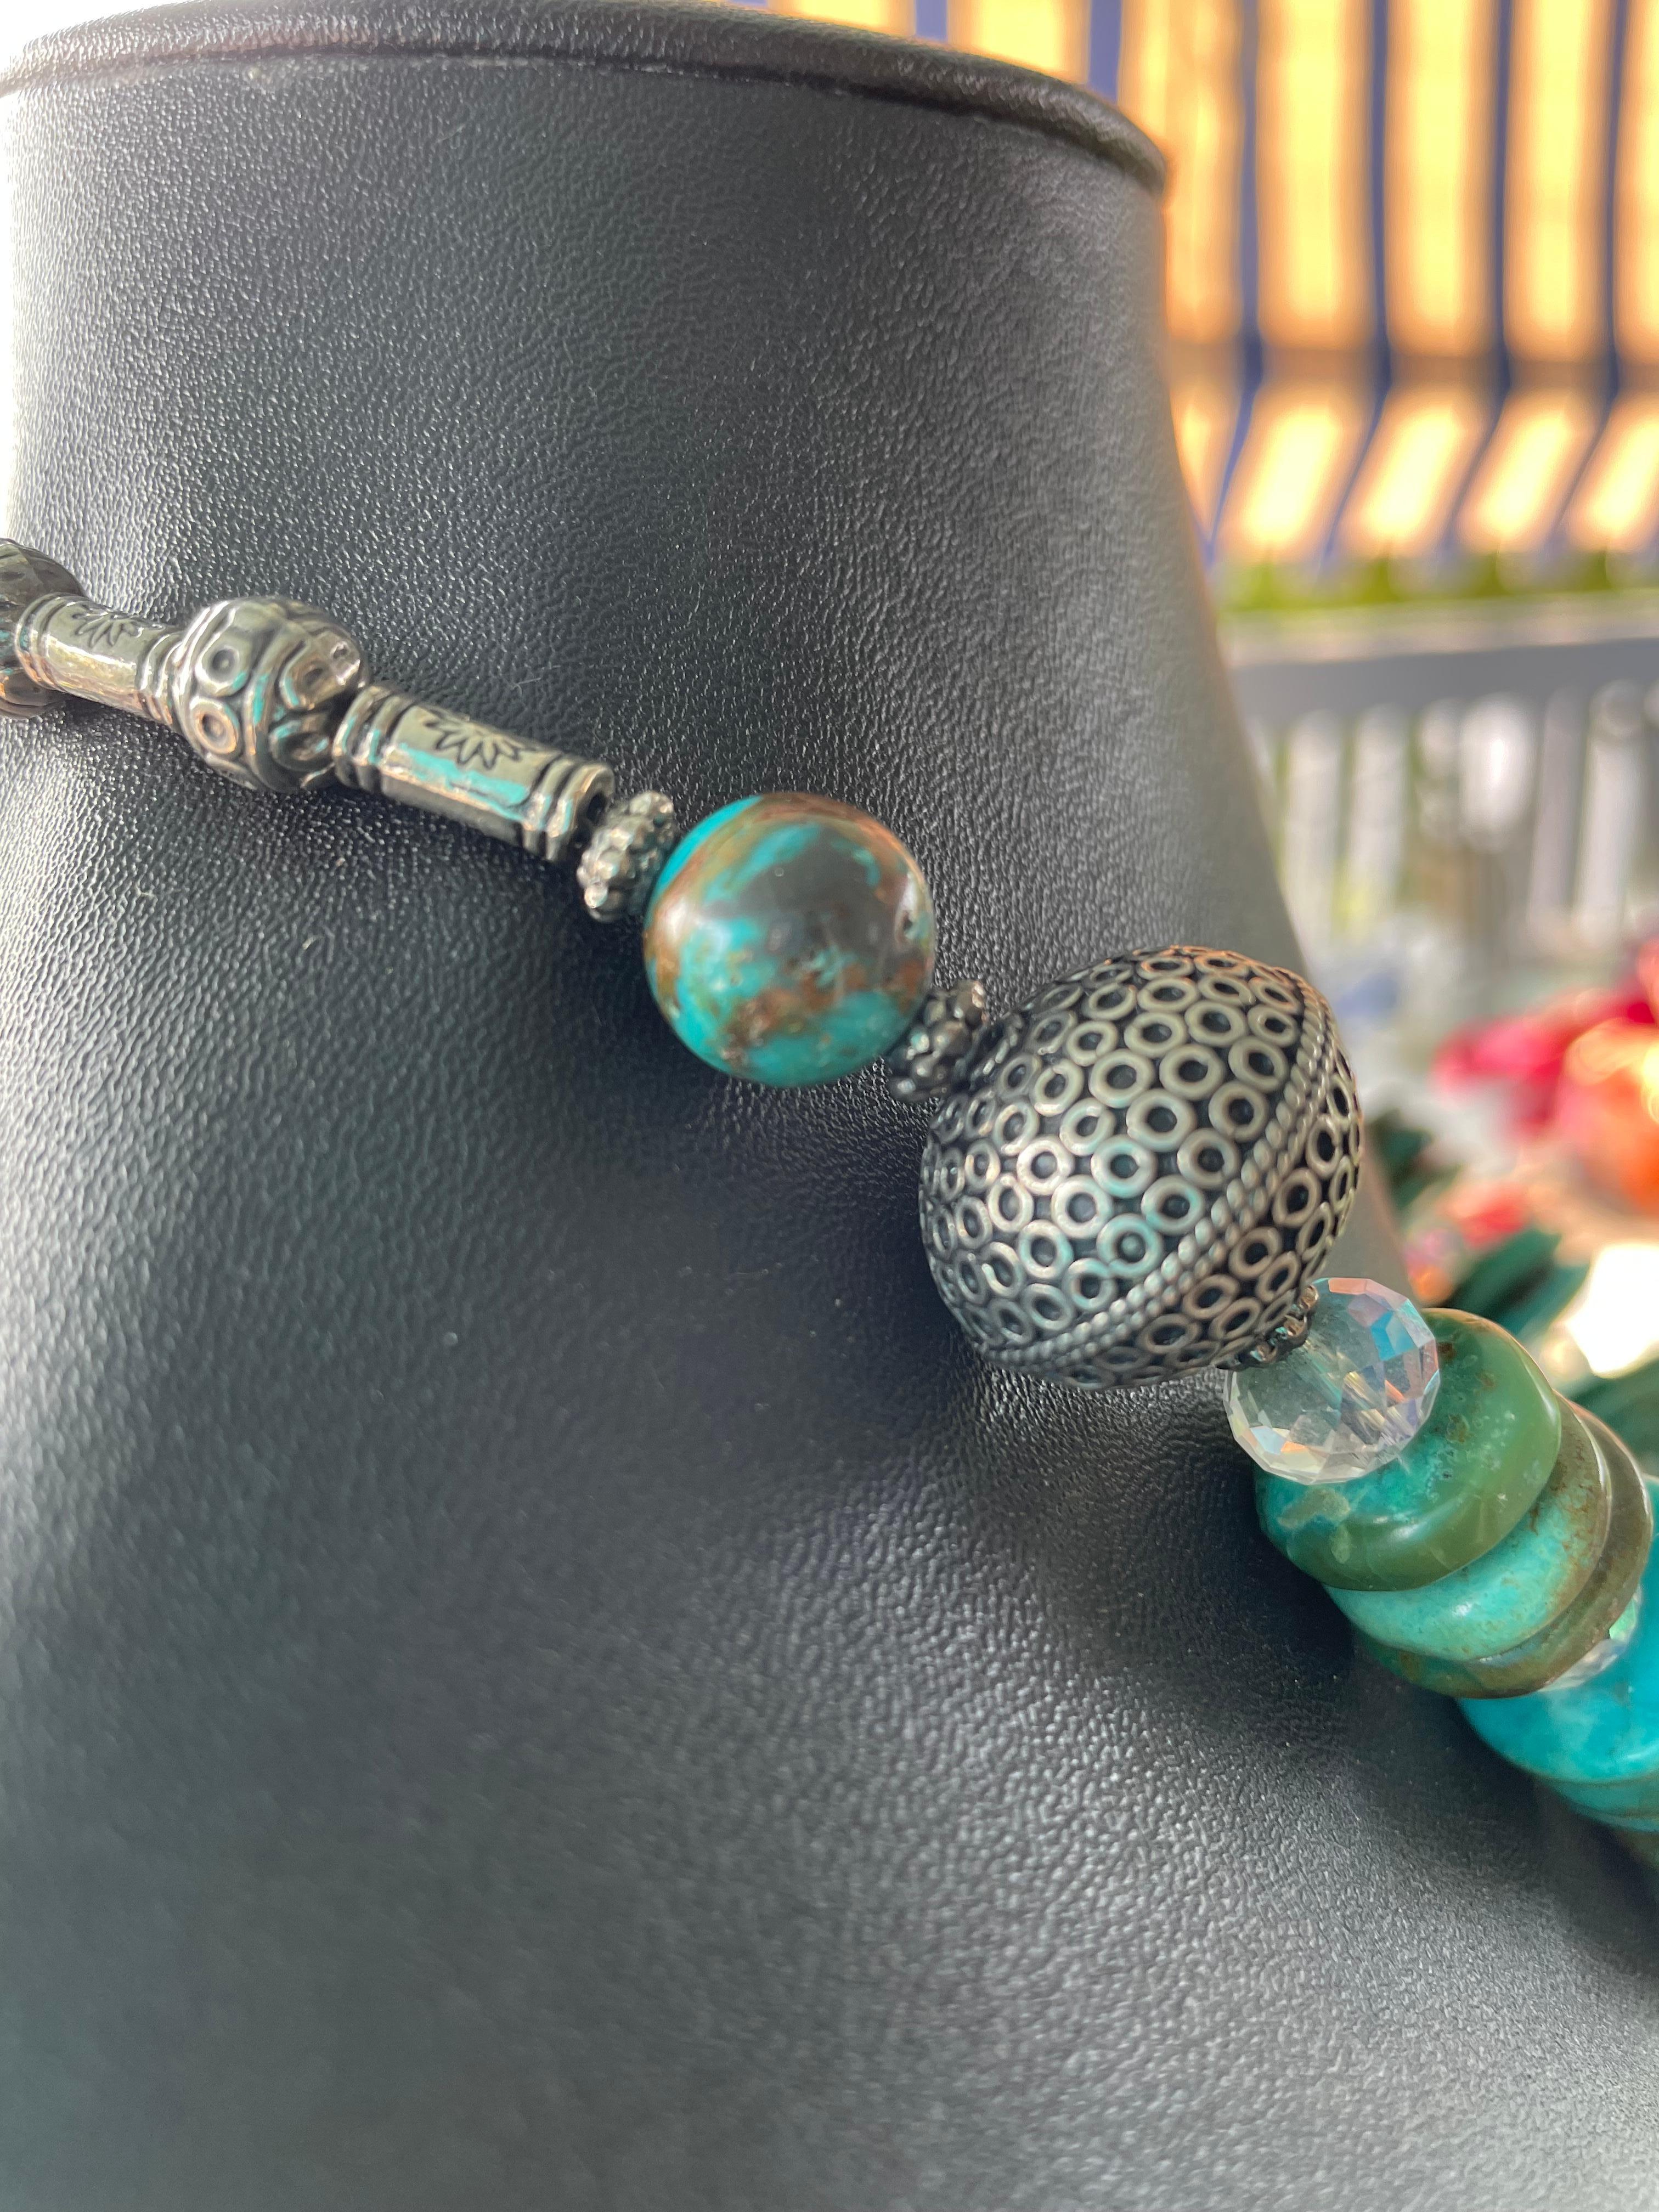 LB offers a gorgeous Kingman Turquoise disc bead necklace from Arizona mine. In my travels I found these amazing beads in the boutique at the mine location. They are gorgeous greens and blues and tans and absolutely glow. The Swarovski aurora